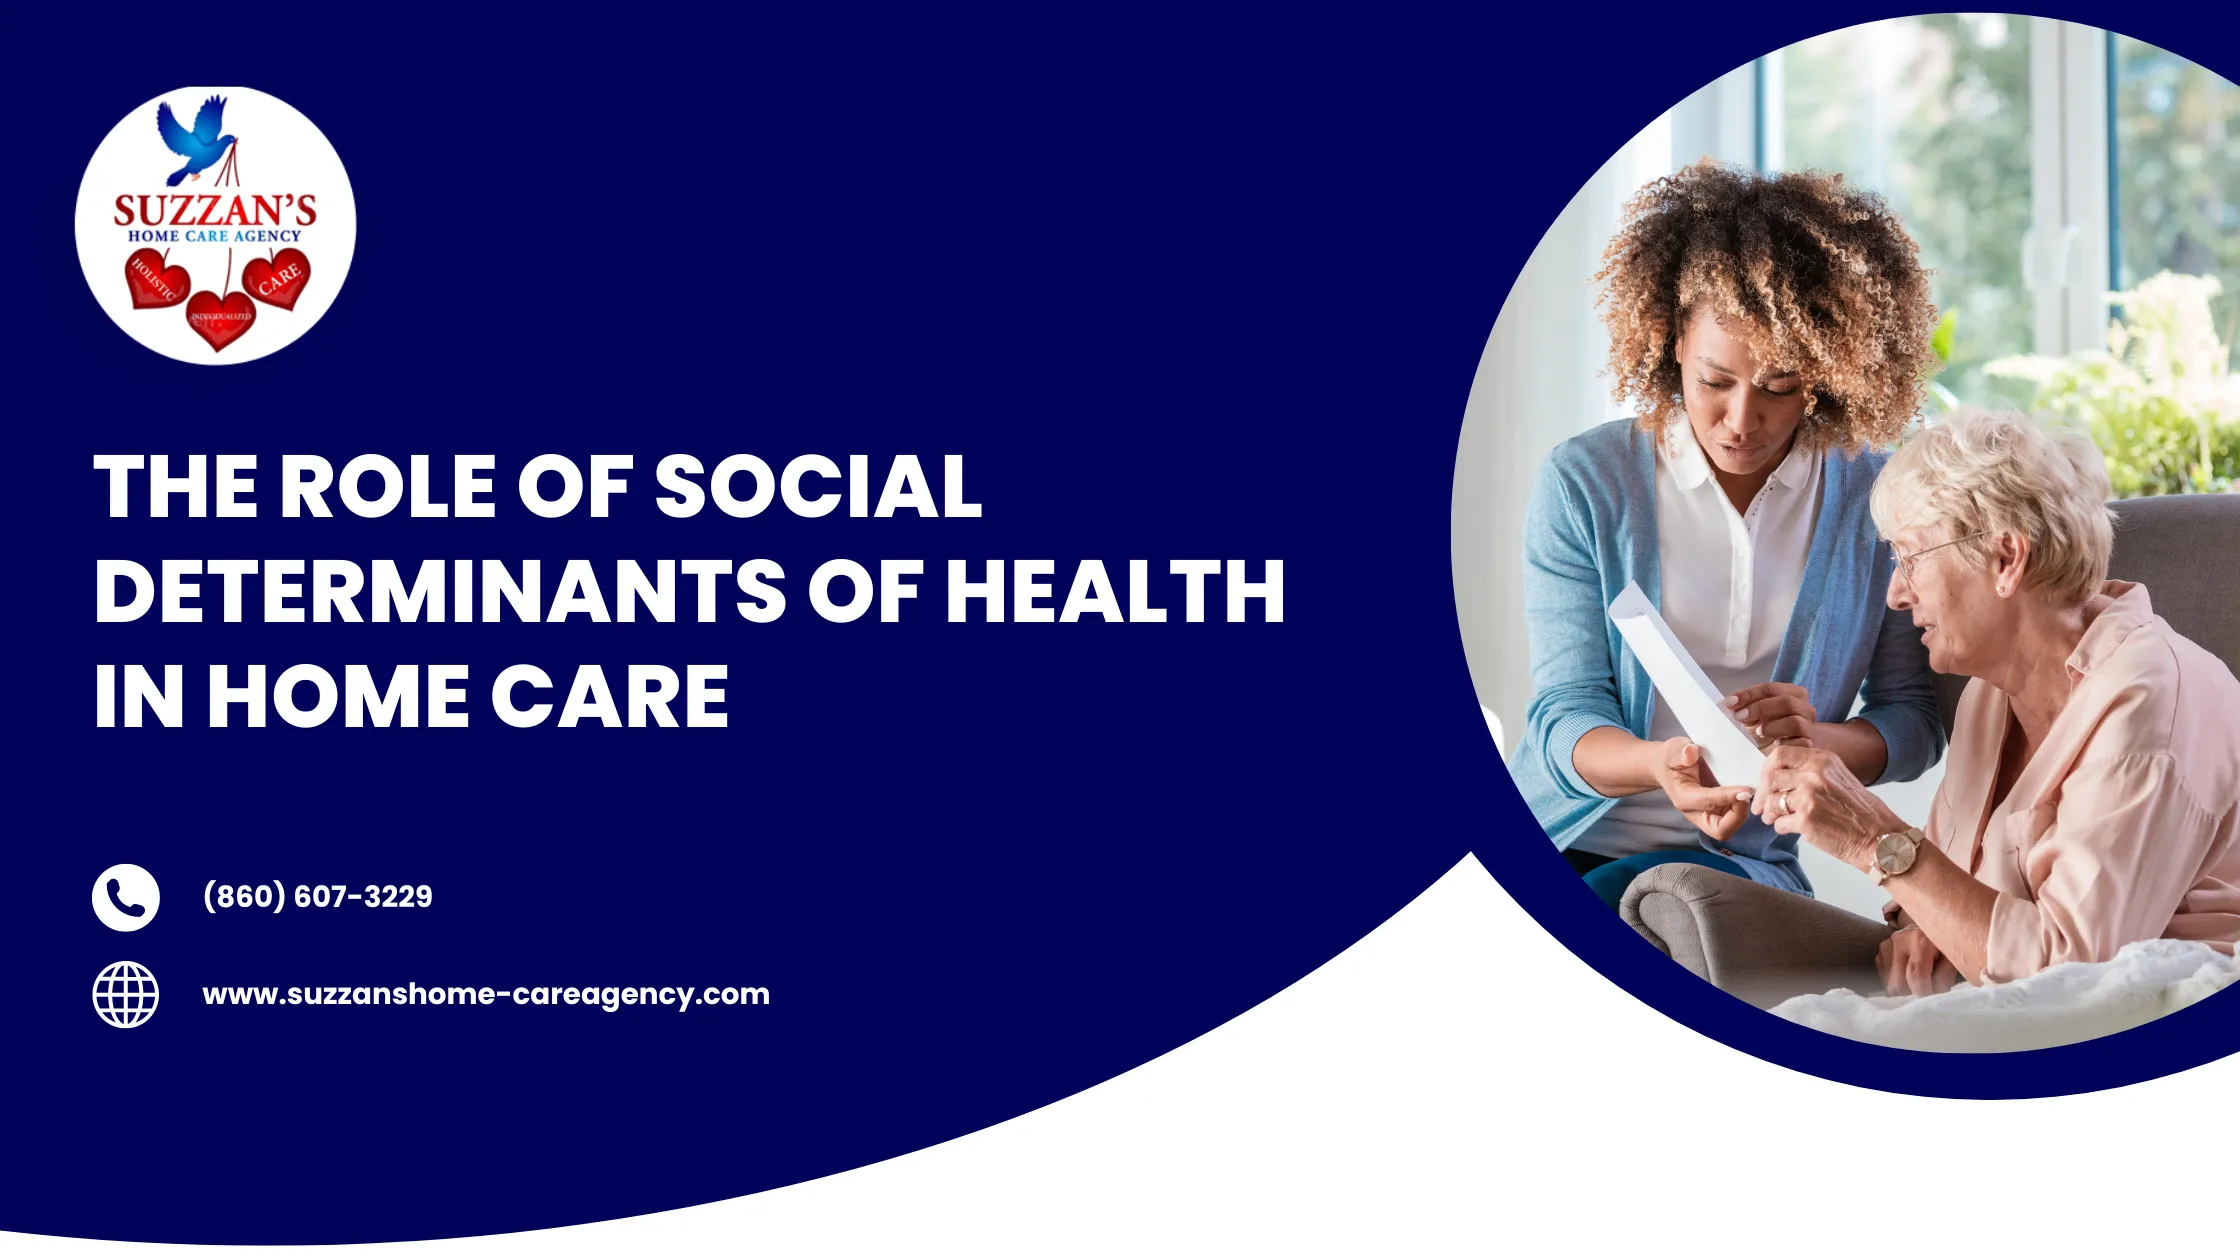 The Role of Social Determinants of Health in Home Care